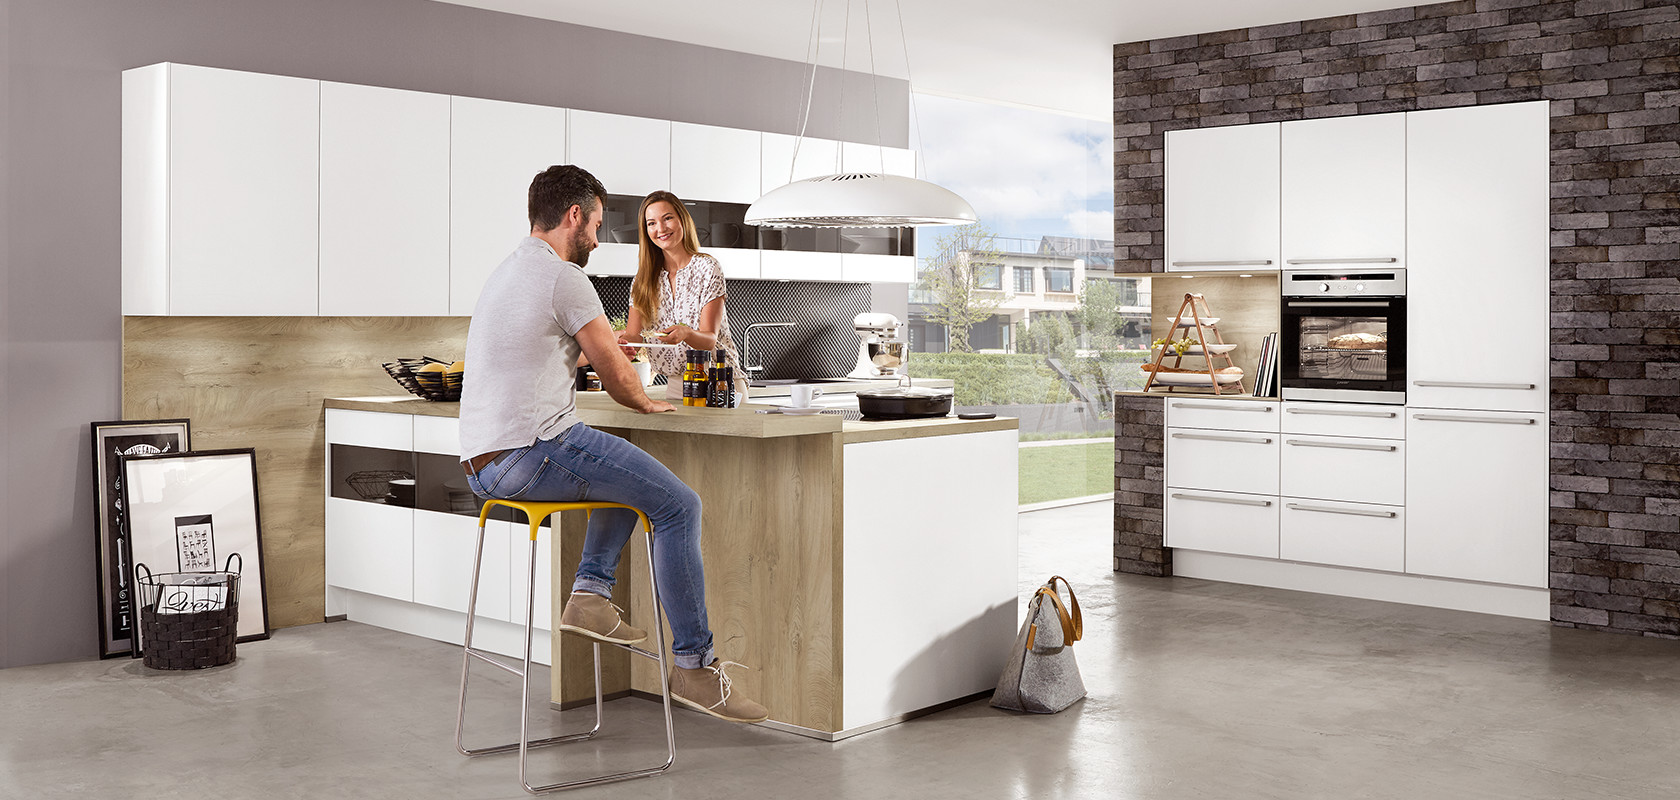 A modern kitchen setting with a smiling couple engaging over a meal prep island, featuring sleek appliances and minimalist design aesthetics.